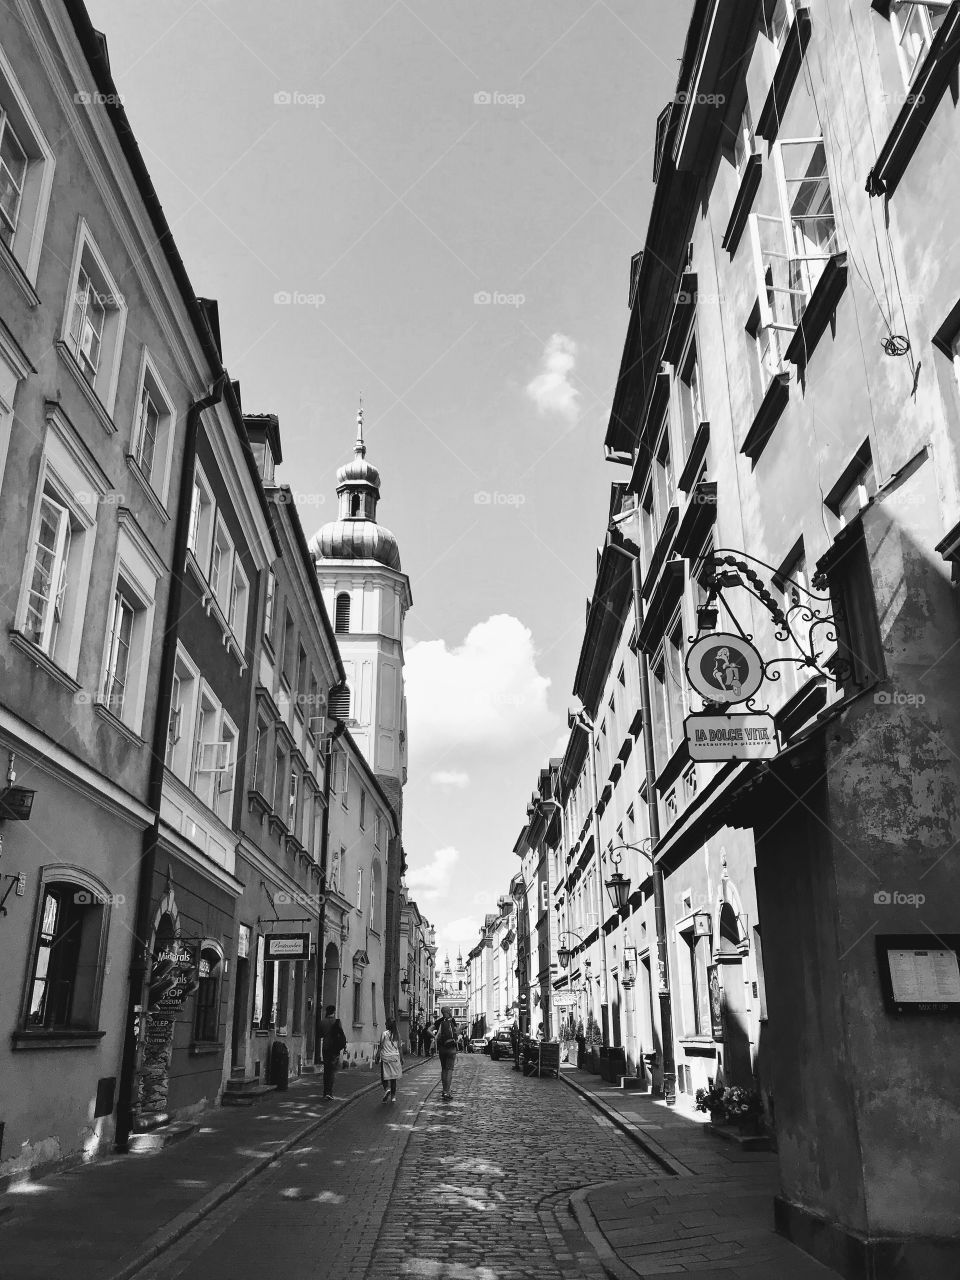 Warsaw old town 